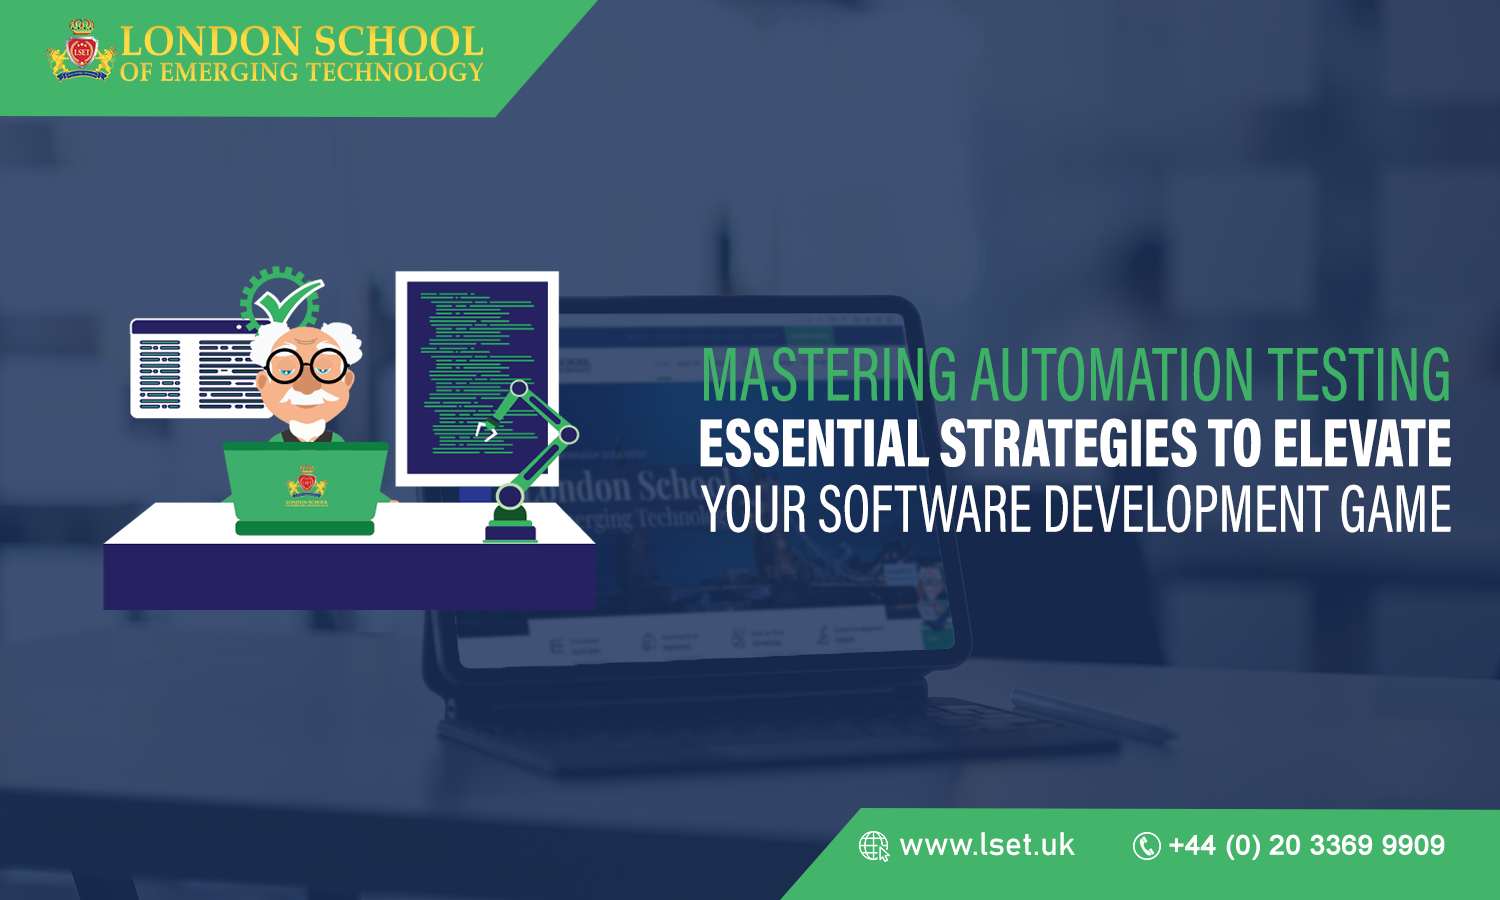 Mastering Automation Testing Essential Strategies to Elevate Your Software Development Game